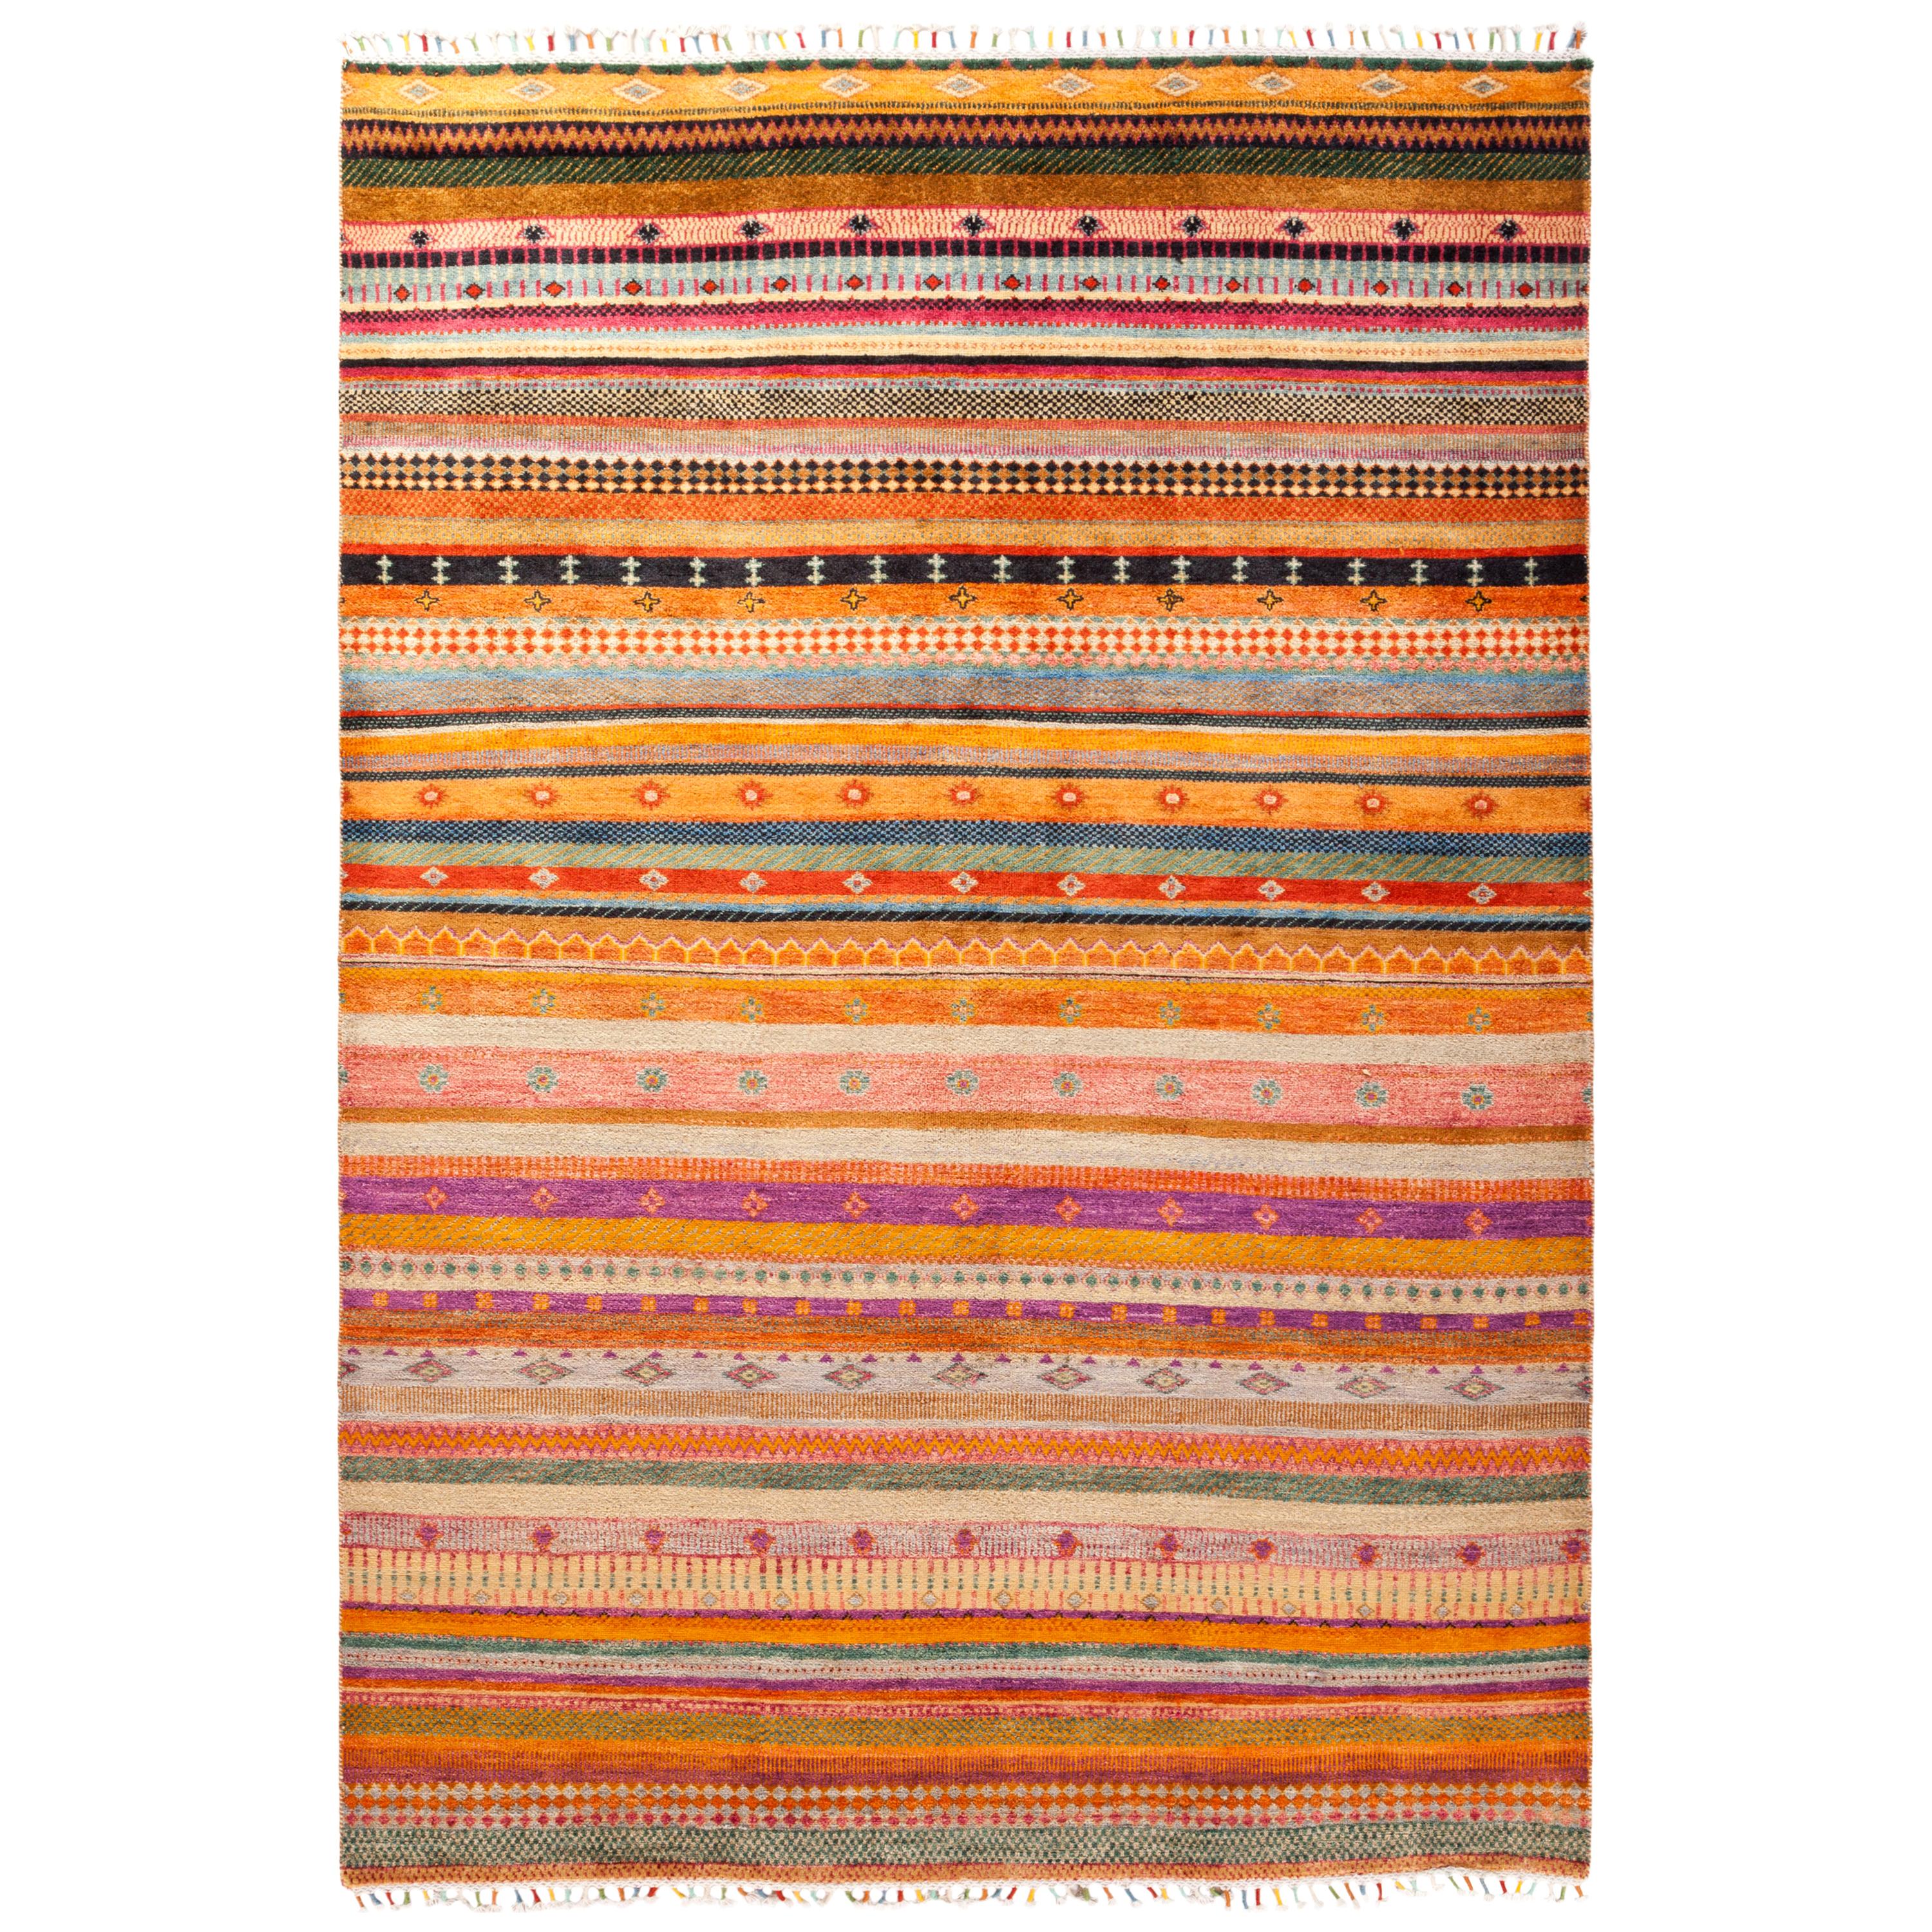 One of a Kind Tribal Wool Hand Knotted Area Rug, Tangerine